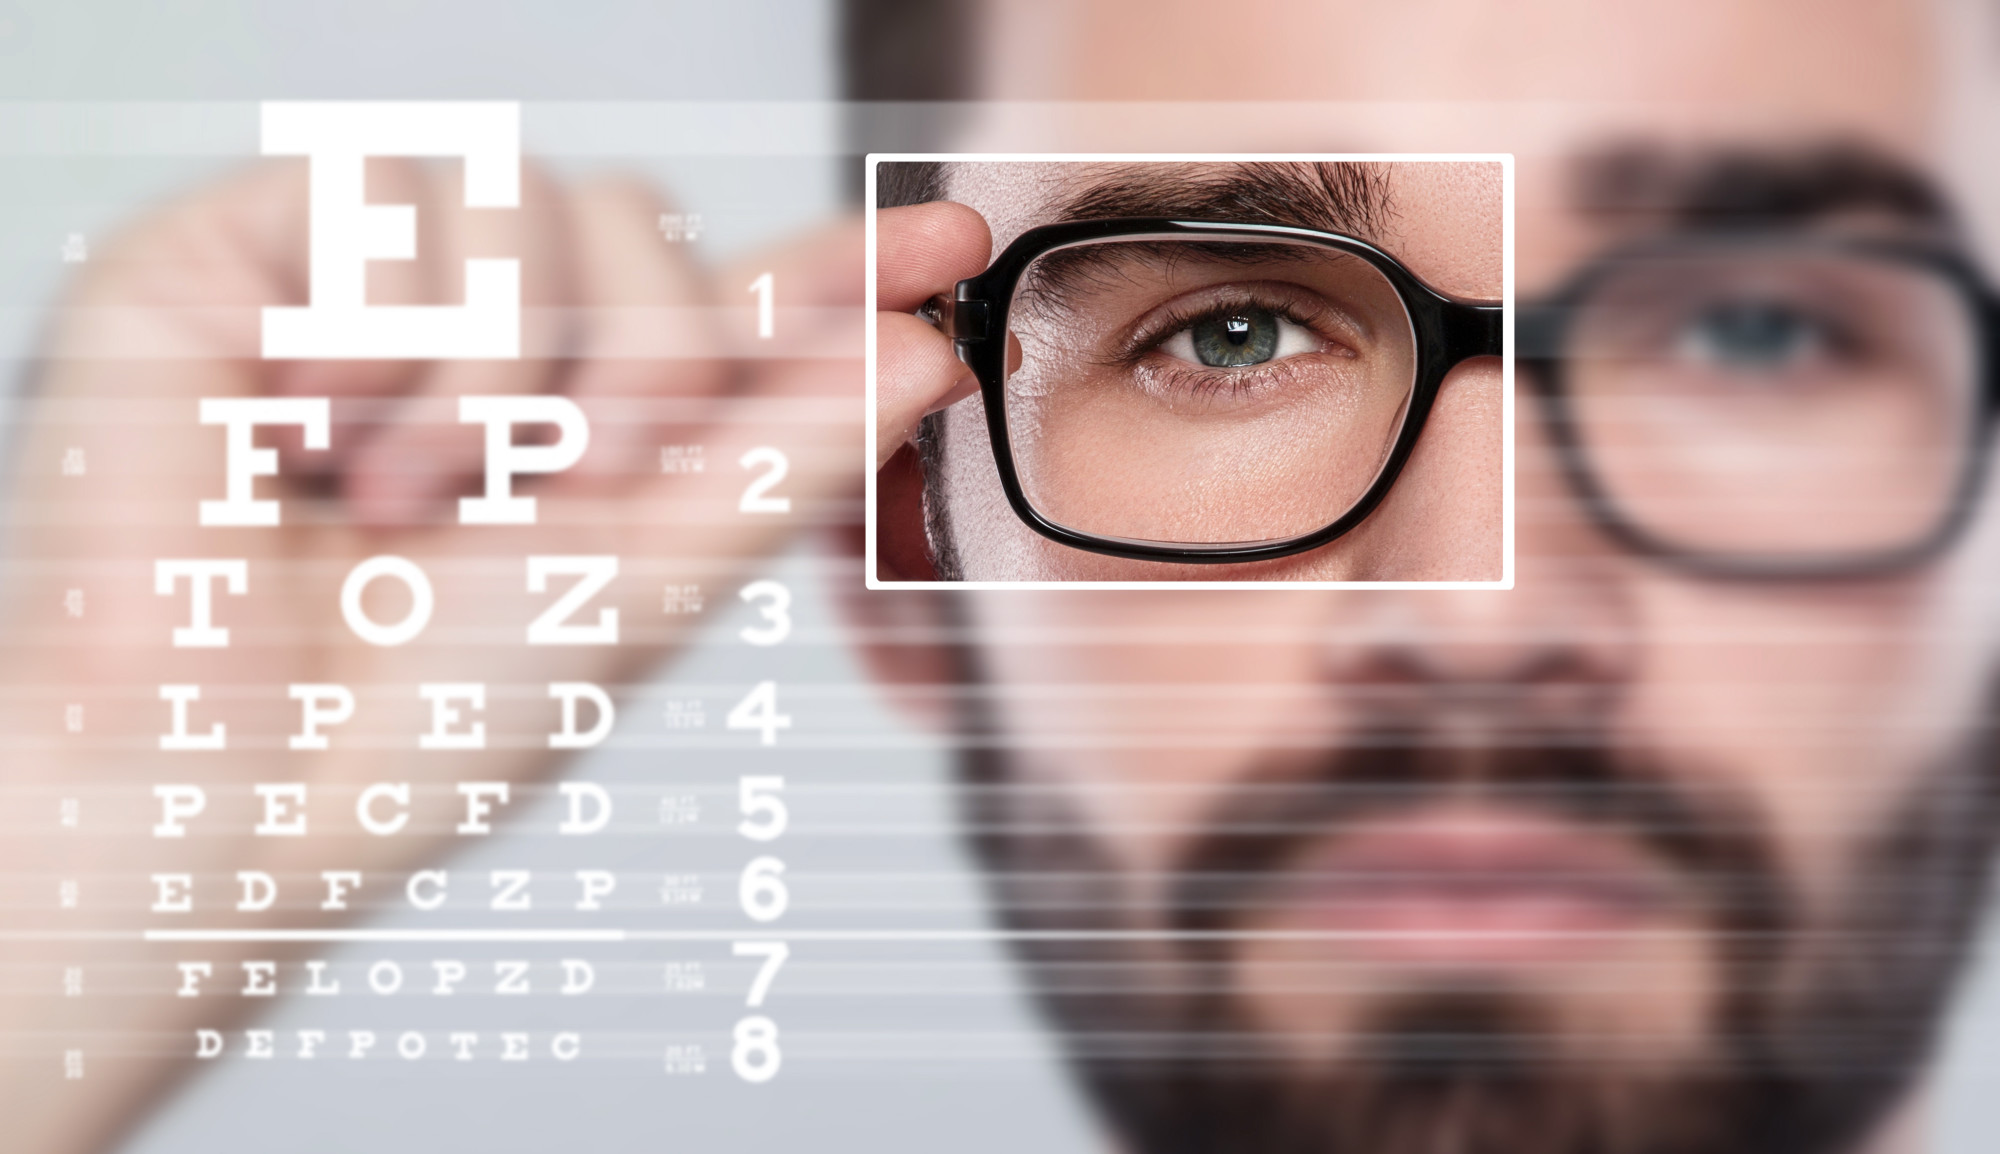 Do you need help with selecting the right eye care provider for your needs? Here are some important things for you to consider.